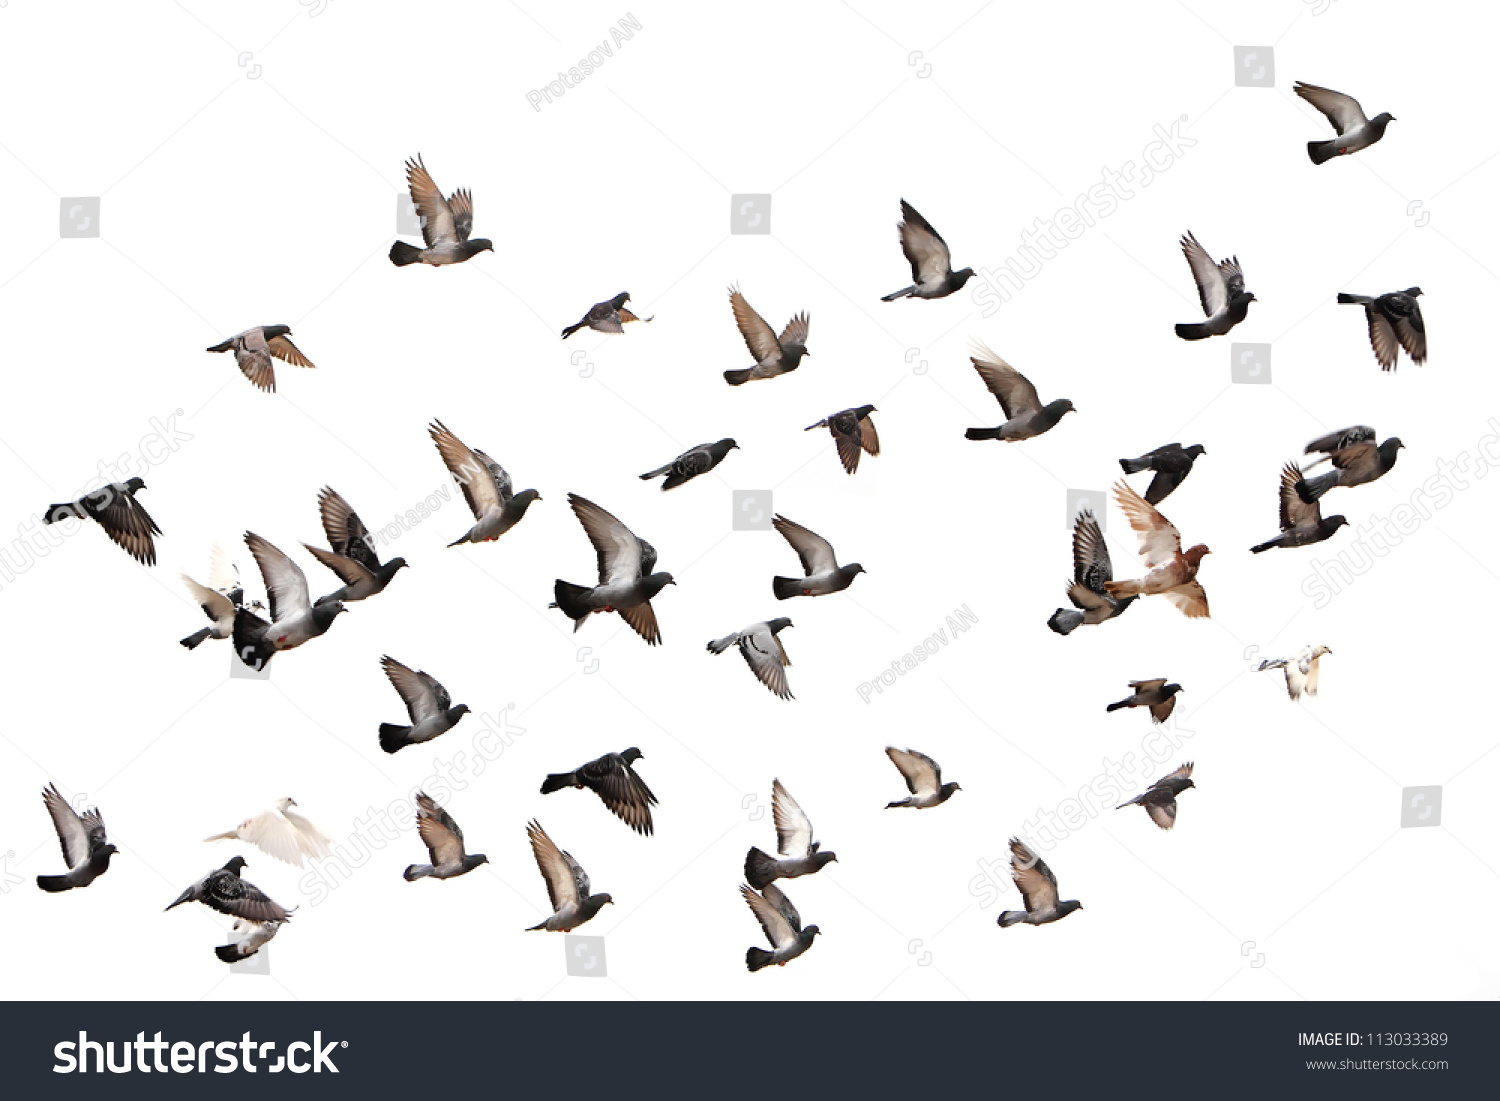 Flying pigeons. Flock (flight) of birds. Free birds isolated on a white background #113033389